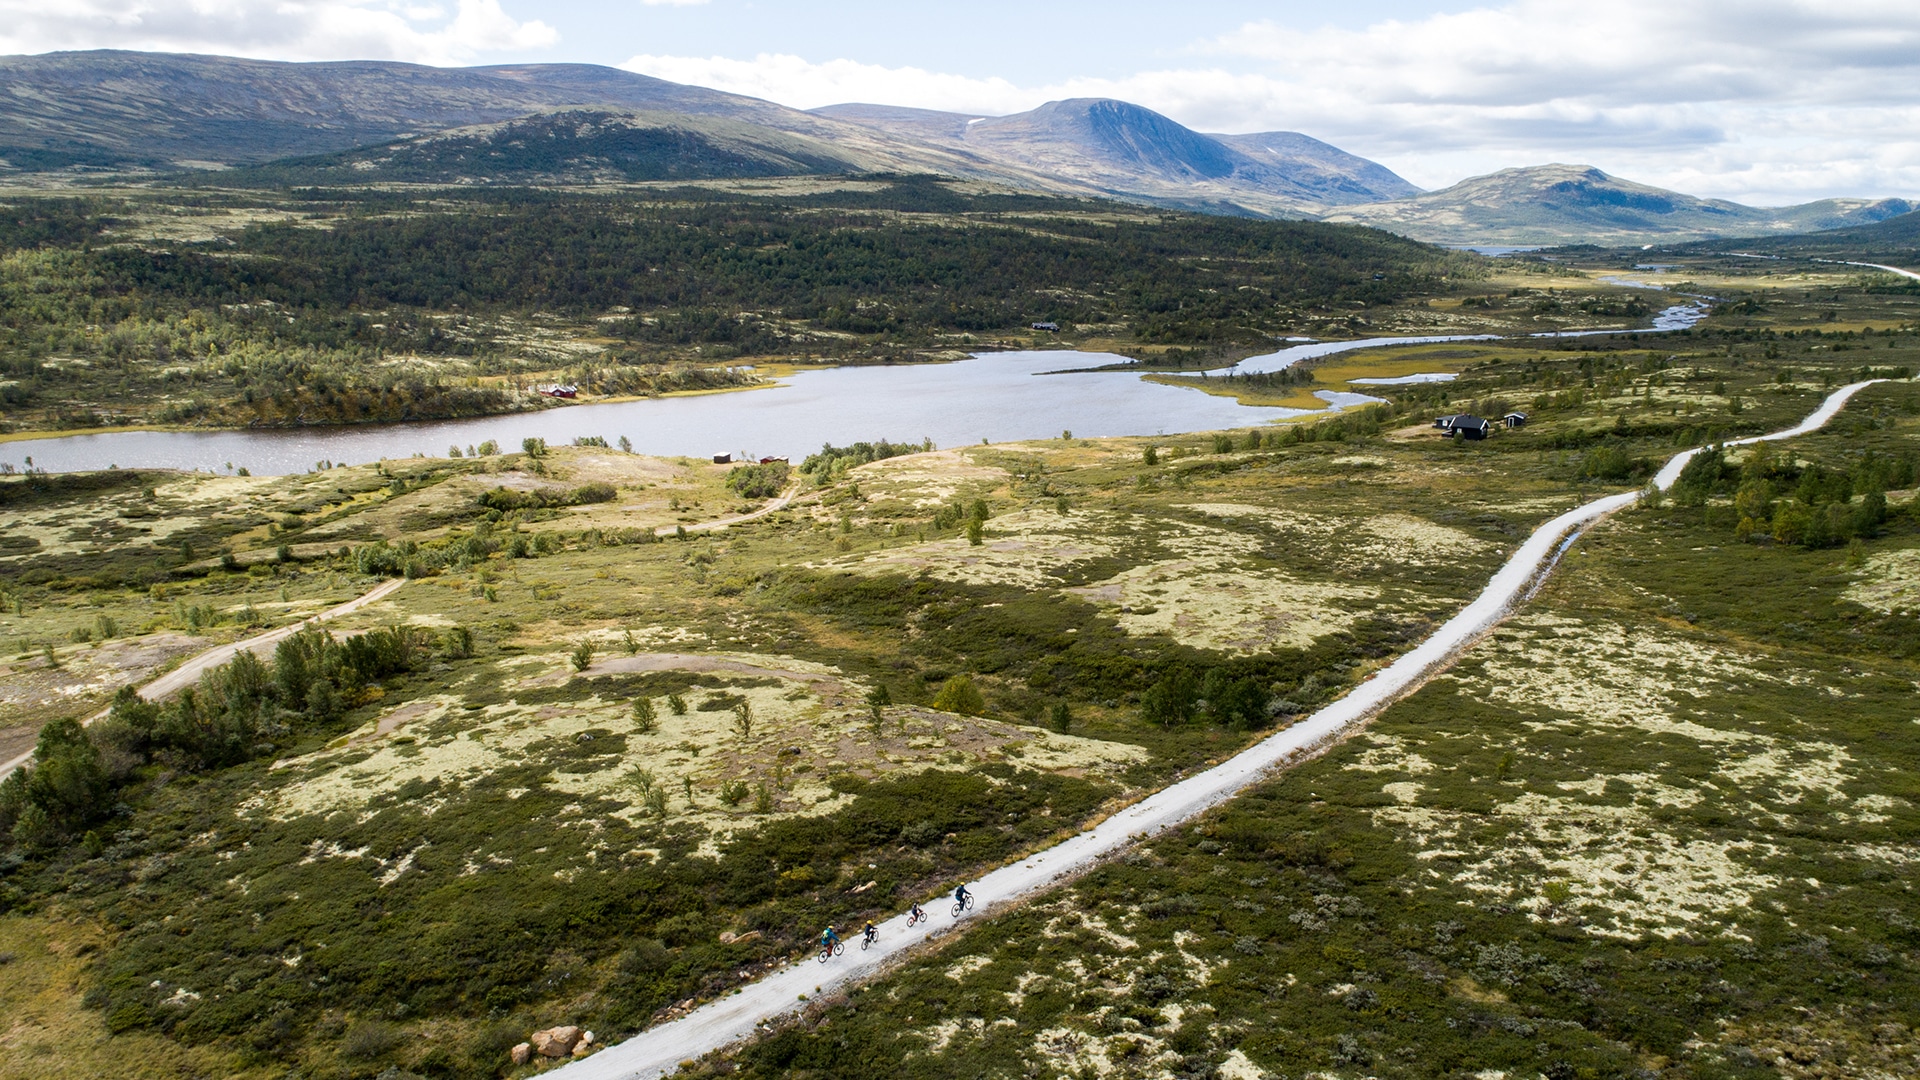 Four people riding bikes on a winding path in the mountain landscape of Dovrefjell.